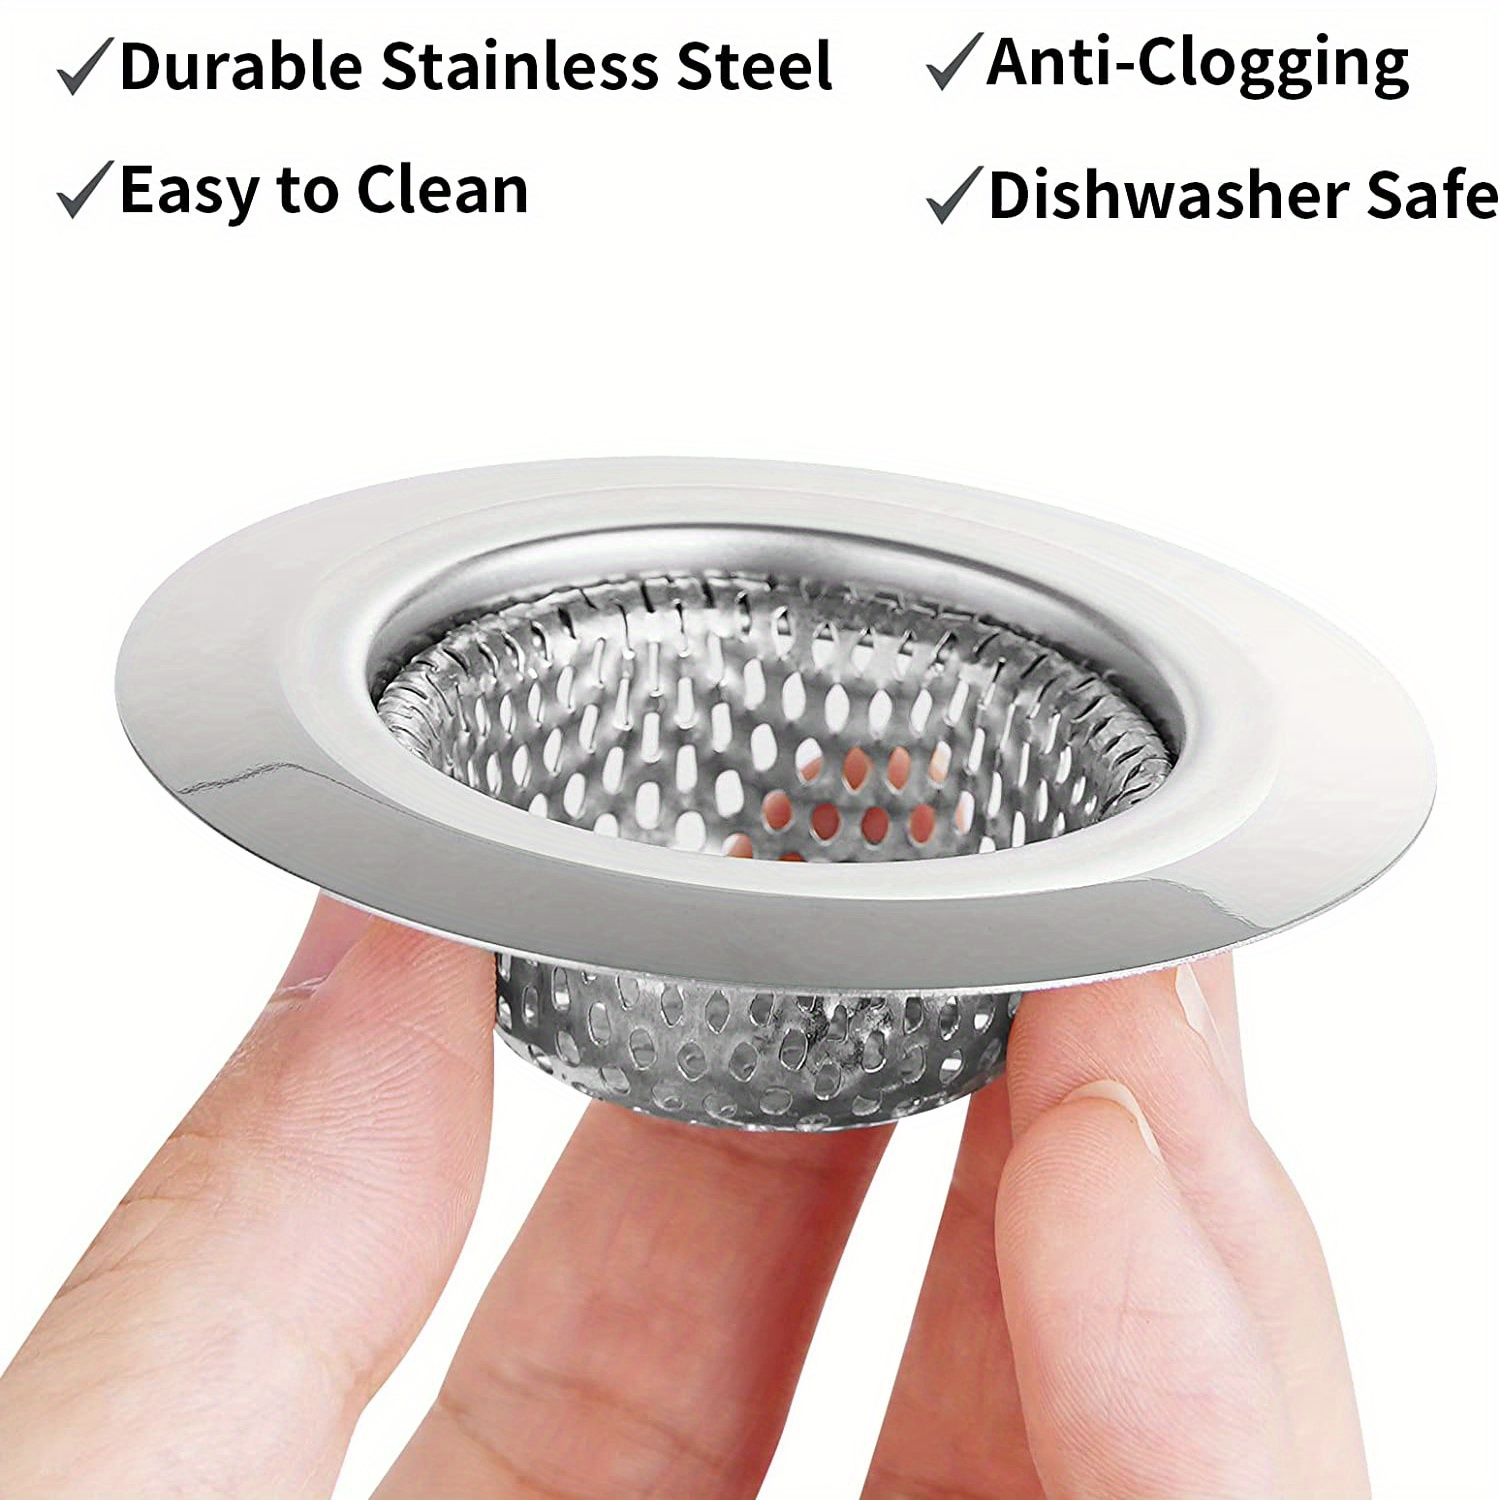 1pc Sink Strainer, Stainless Steel Sink Drain Strainer, Food Catcher,  Anti-Clogging Sewer Filter, Bathroom Drain Stopper, Classic Bathtub Water  Stopper For Bathroom